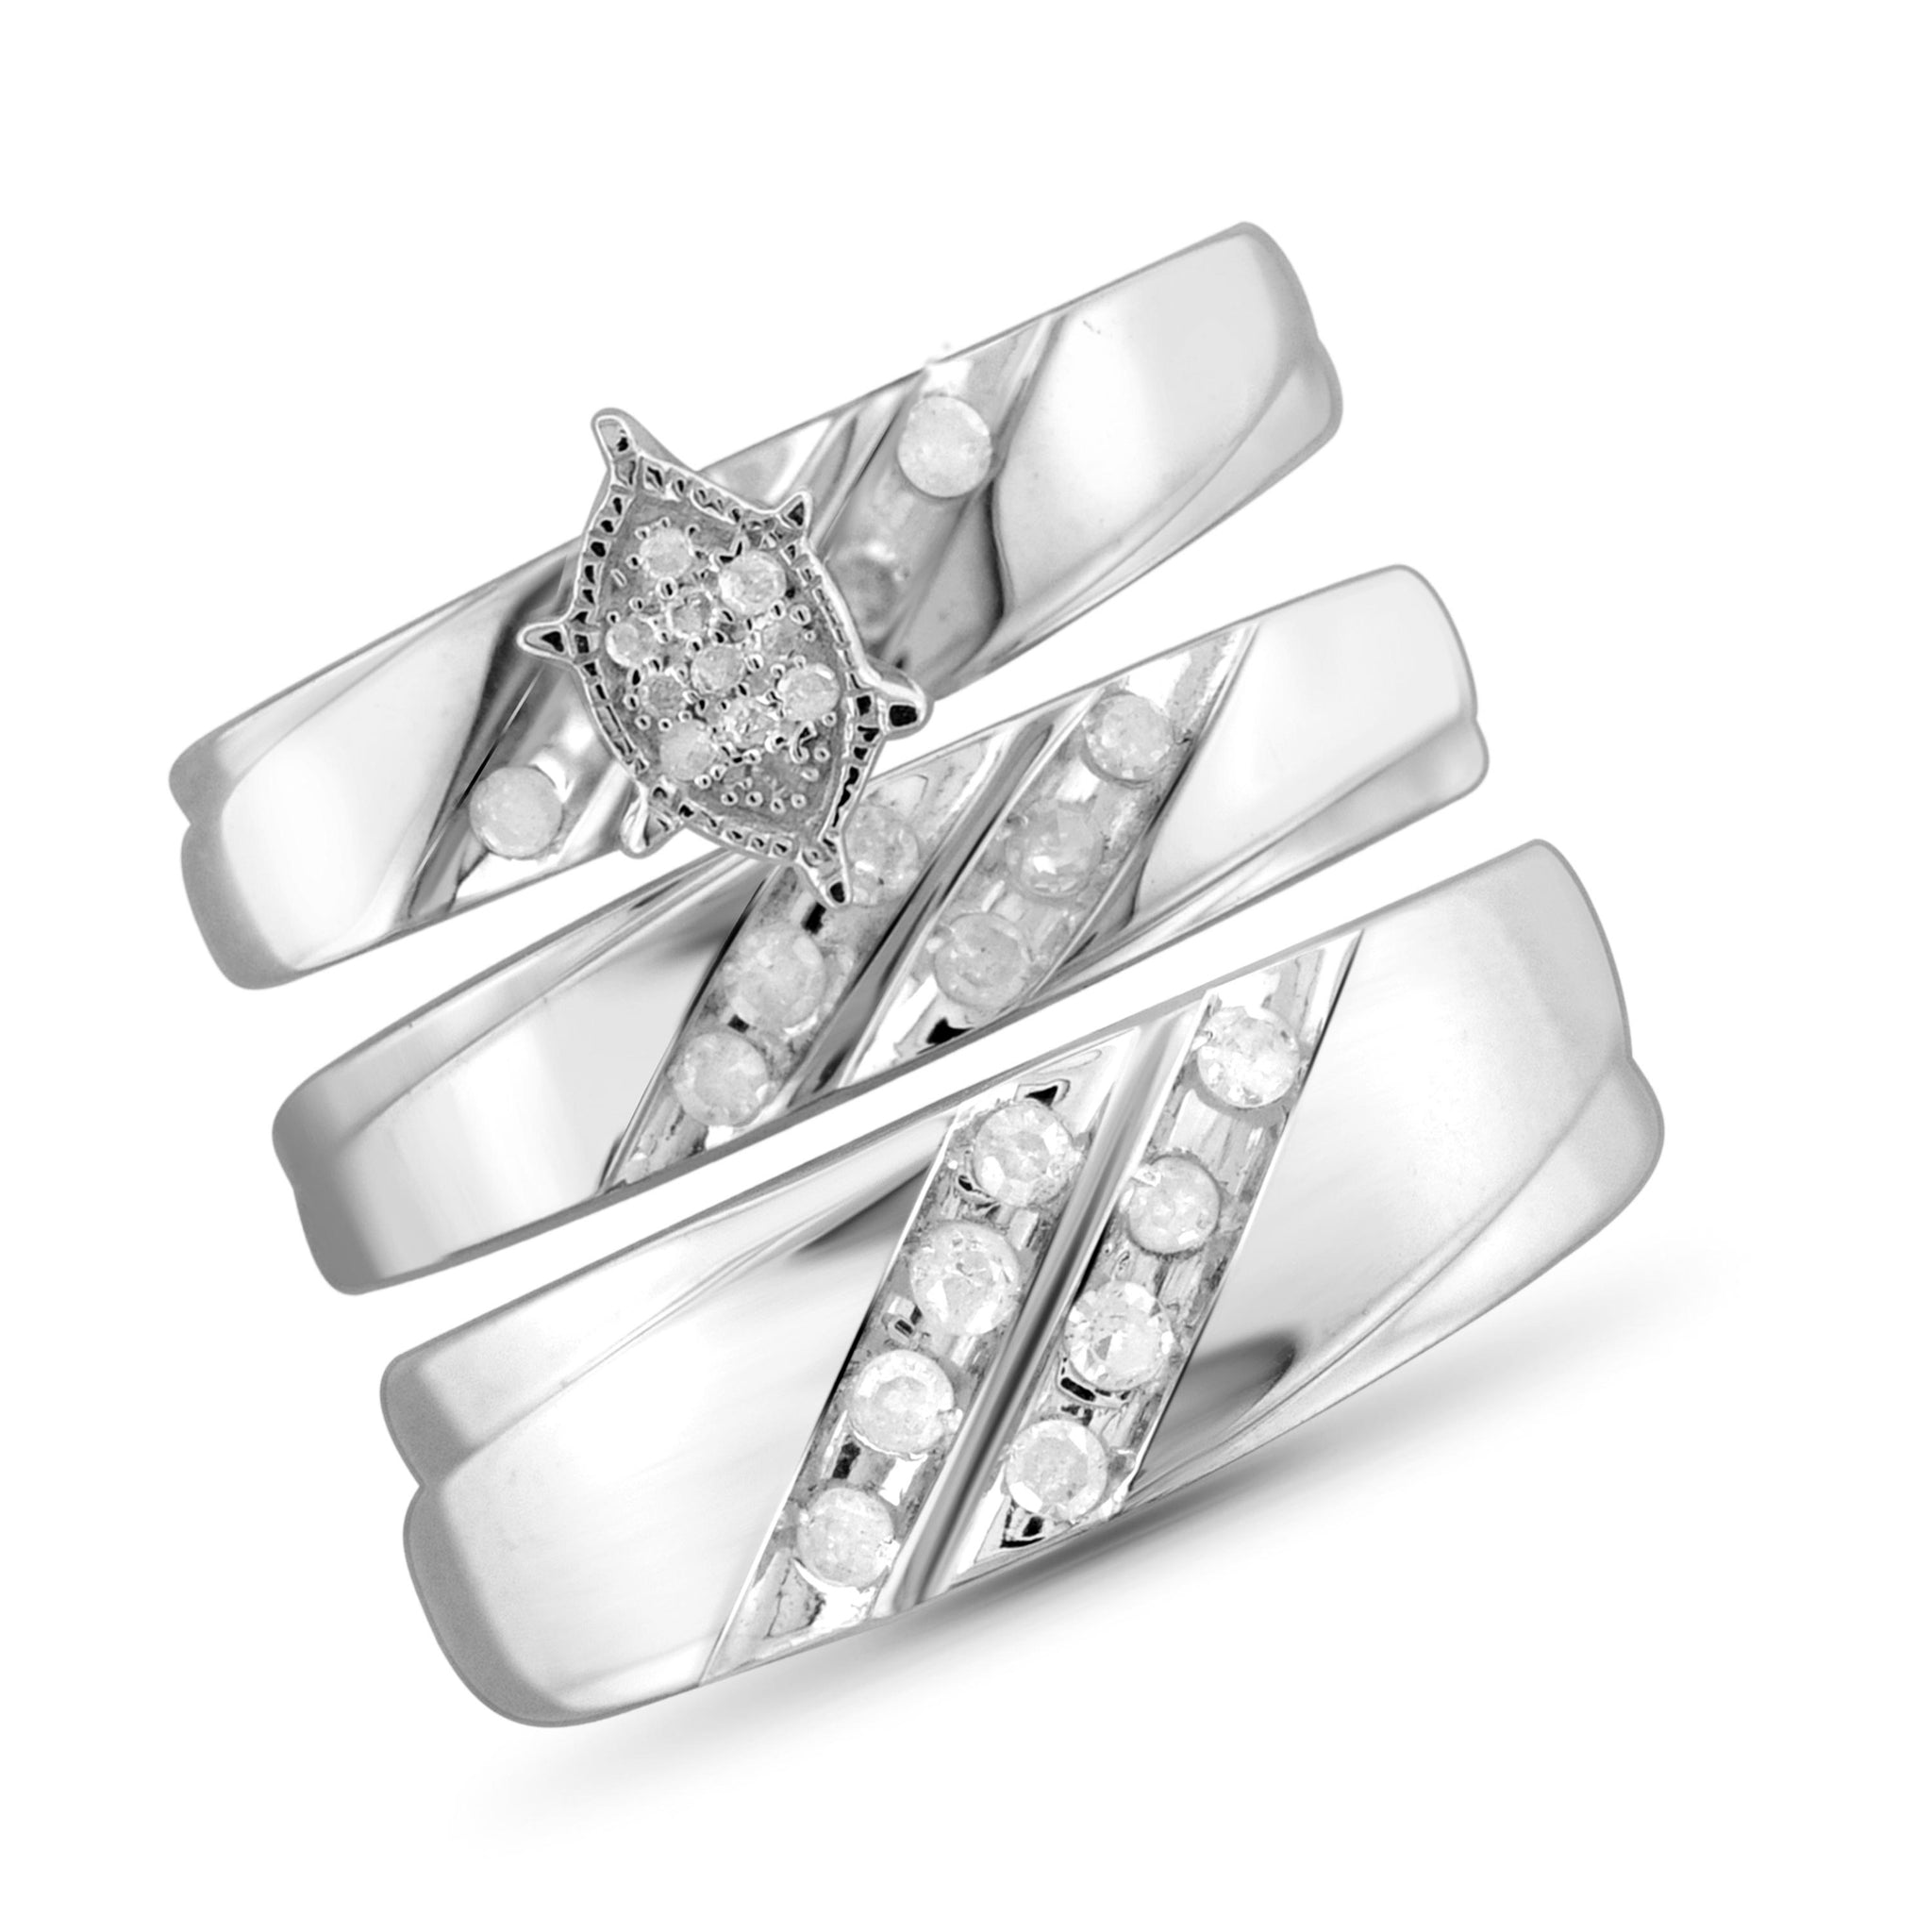 JewelonFire 1/2 Carat T.W. White Diamond Trio Engagement Ring Set in Sterling Silver - Assorted Colors